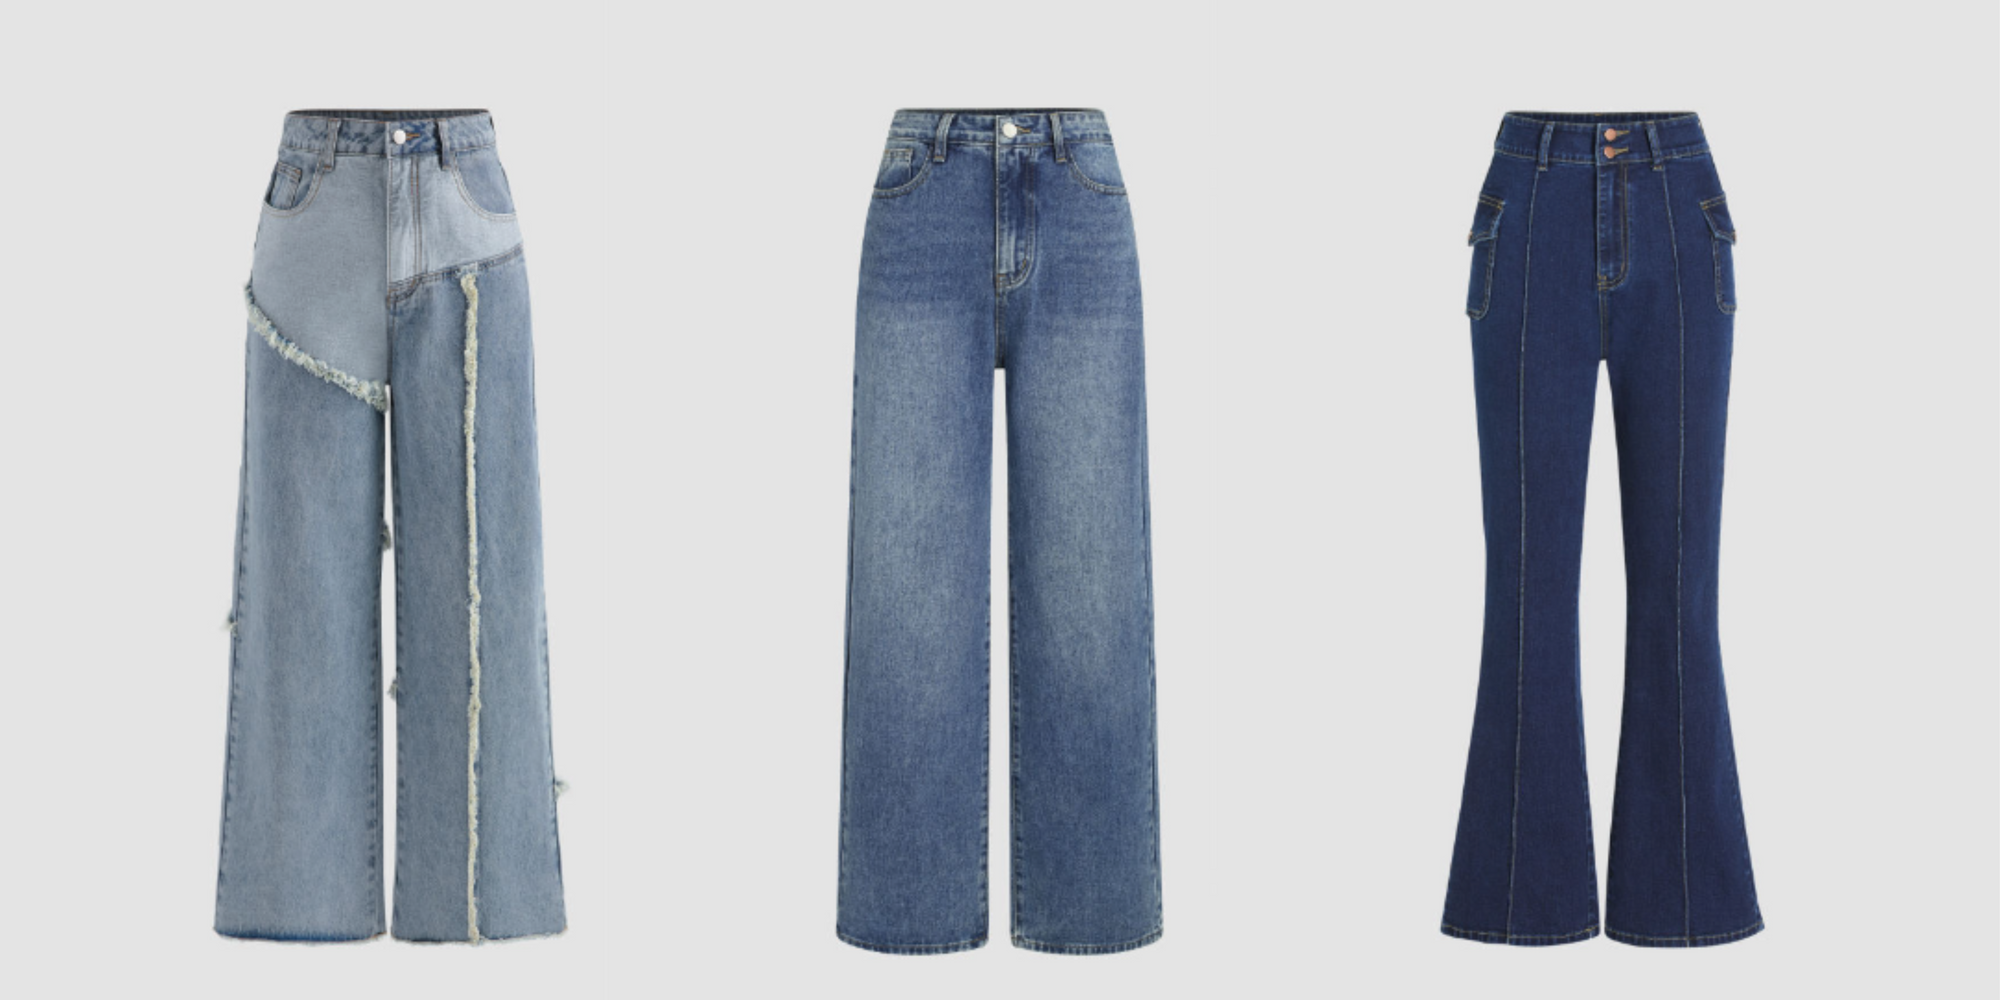 Classic Denim Pants That Are Always On-Trend